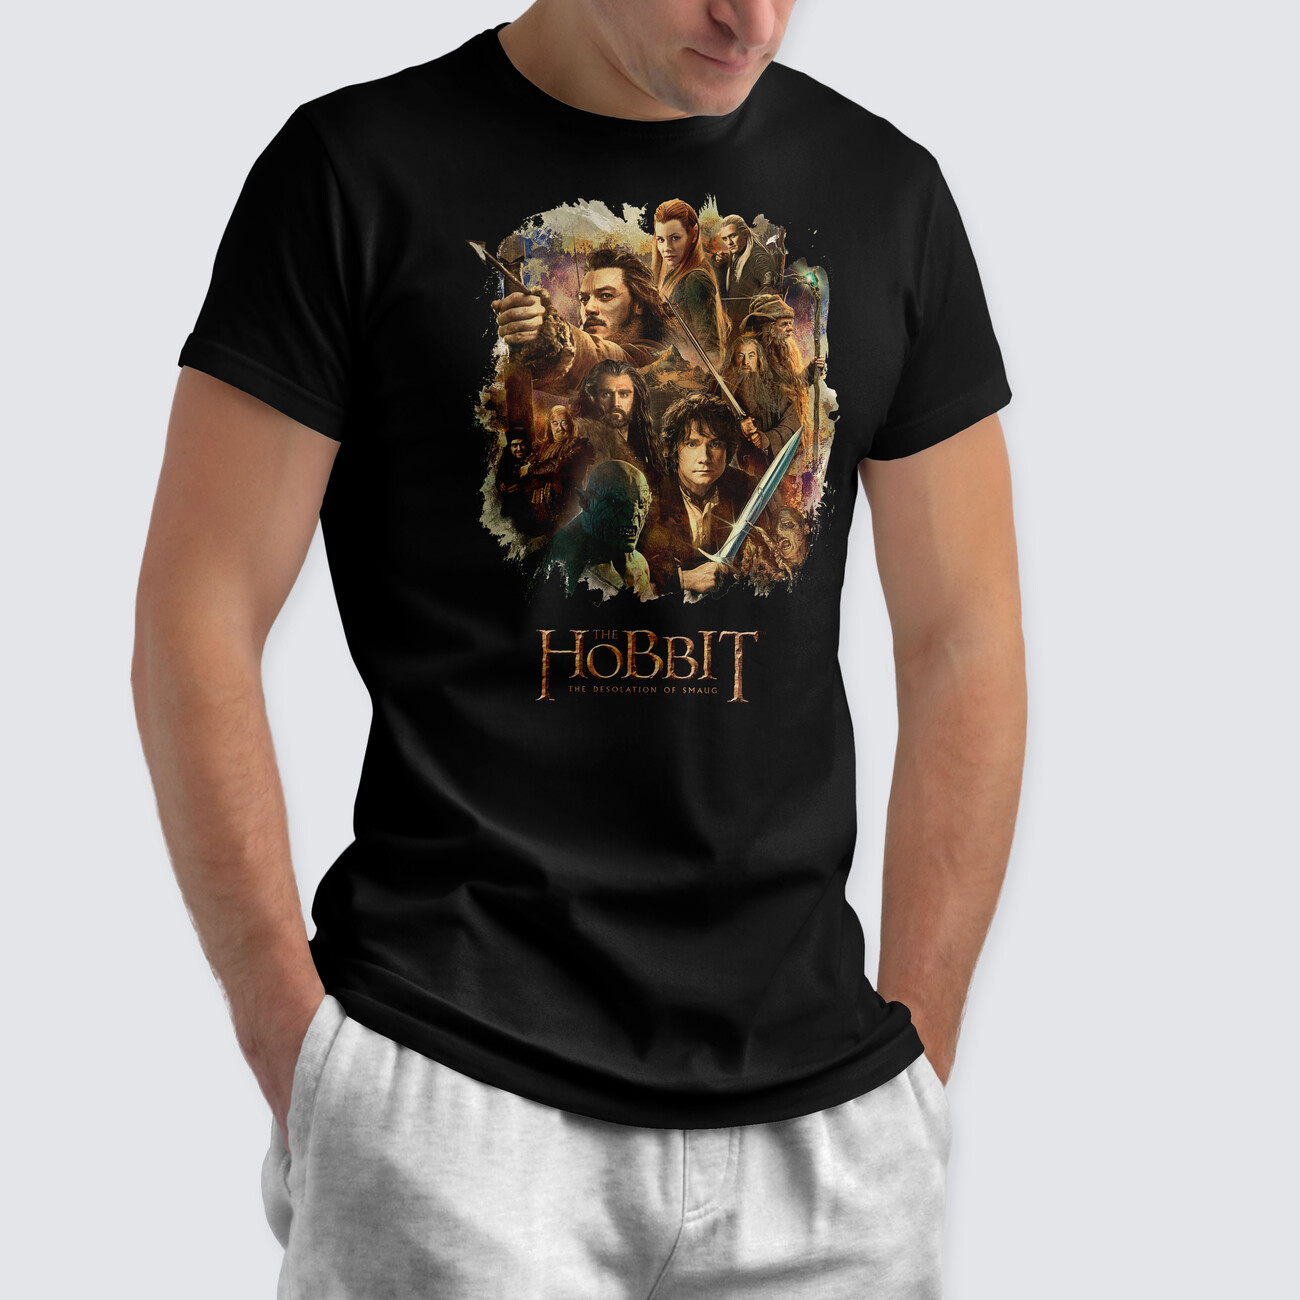 Hobbit: The Desolation of Smaug for Characters - accessories | merchandise Clothes and fans